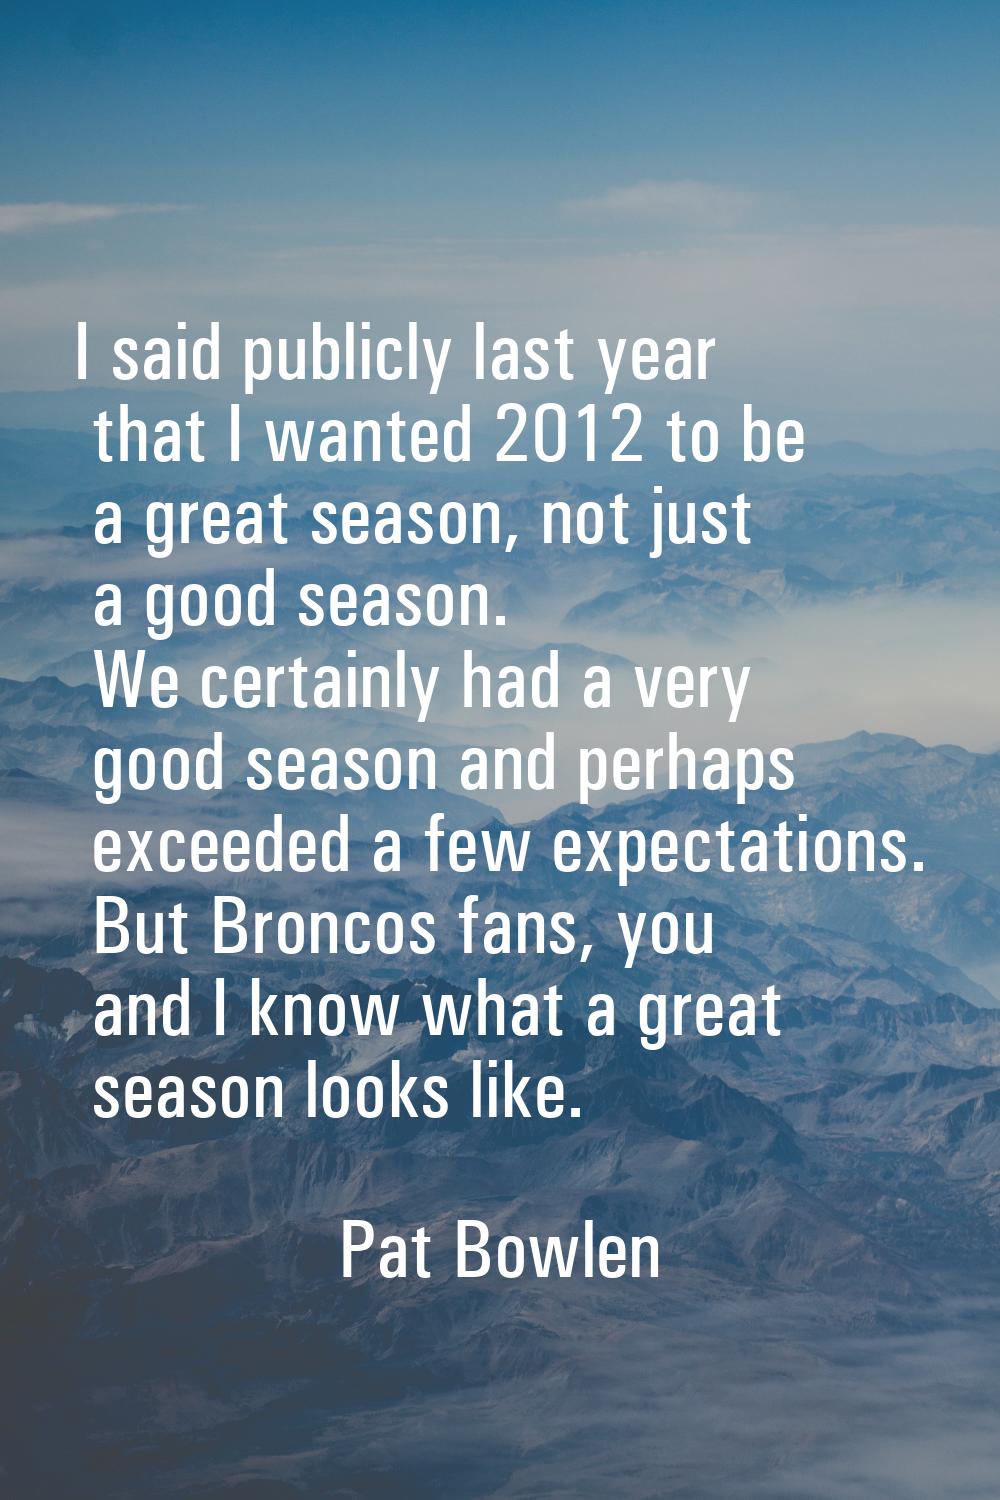 I said publicly last year that I wanted 2012 to be a great season, not just a good season. We certa